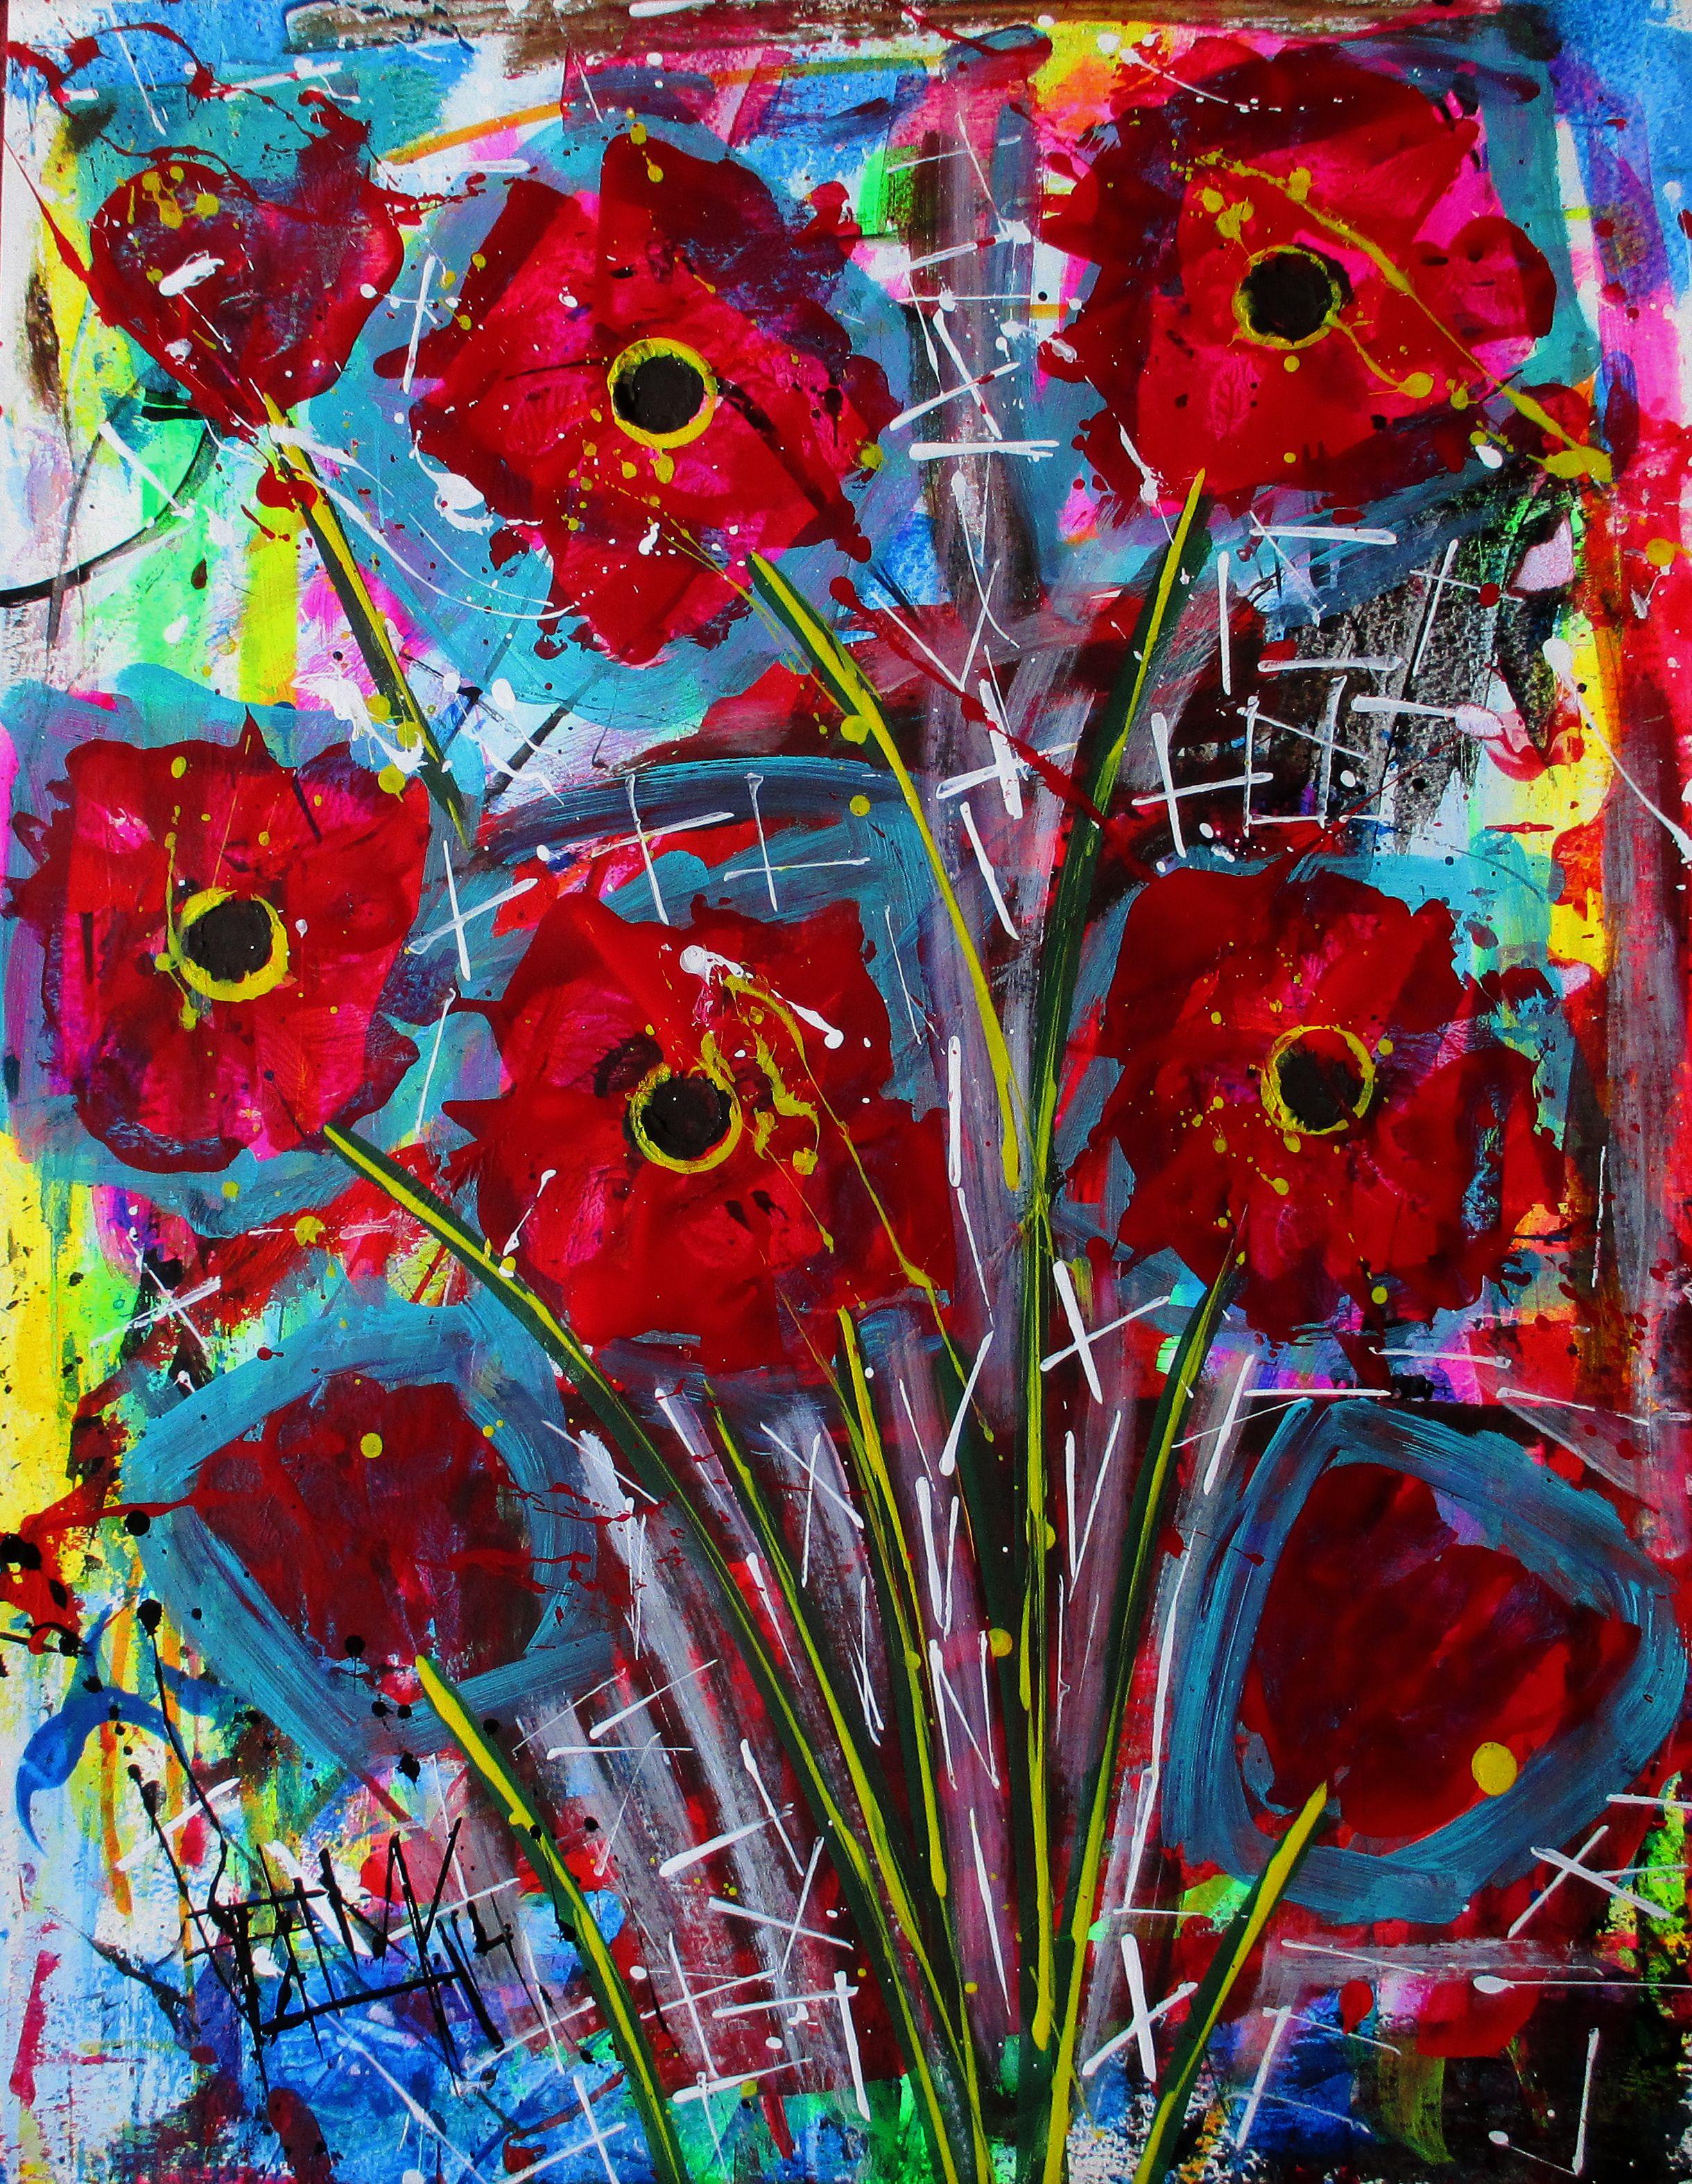 Part of the "Floret" series. Growing up in New York City, I was exposed to the urban colors and imagery of the city. My surroundings and a fascination with the abstract expressionism movement played a major role in me becoming an artist. I approach